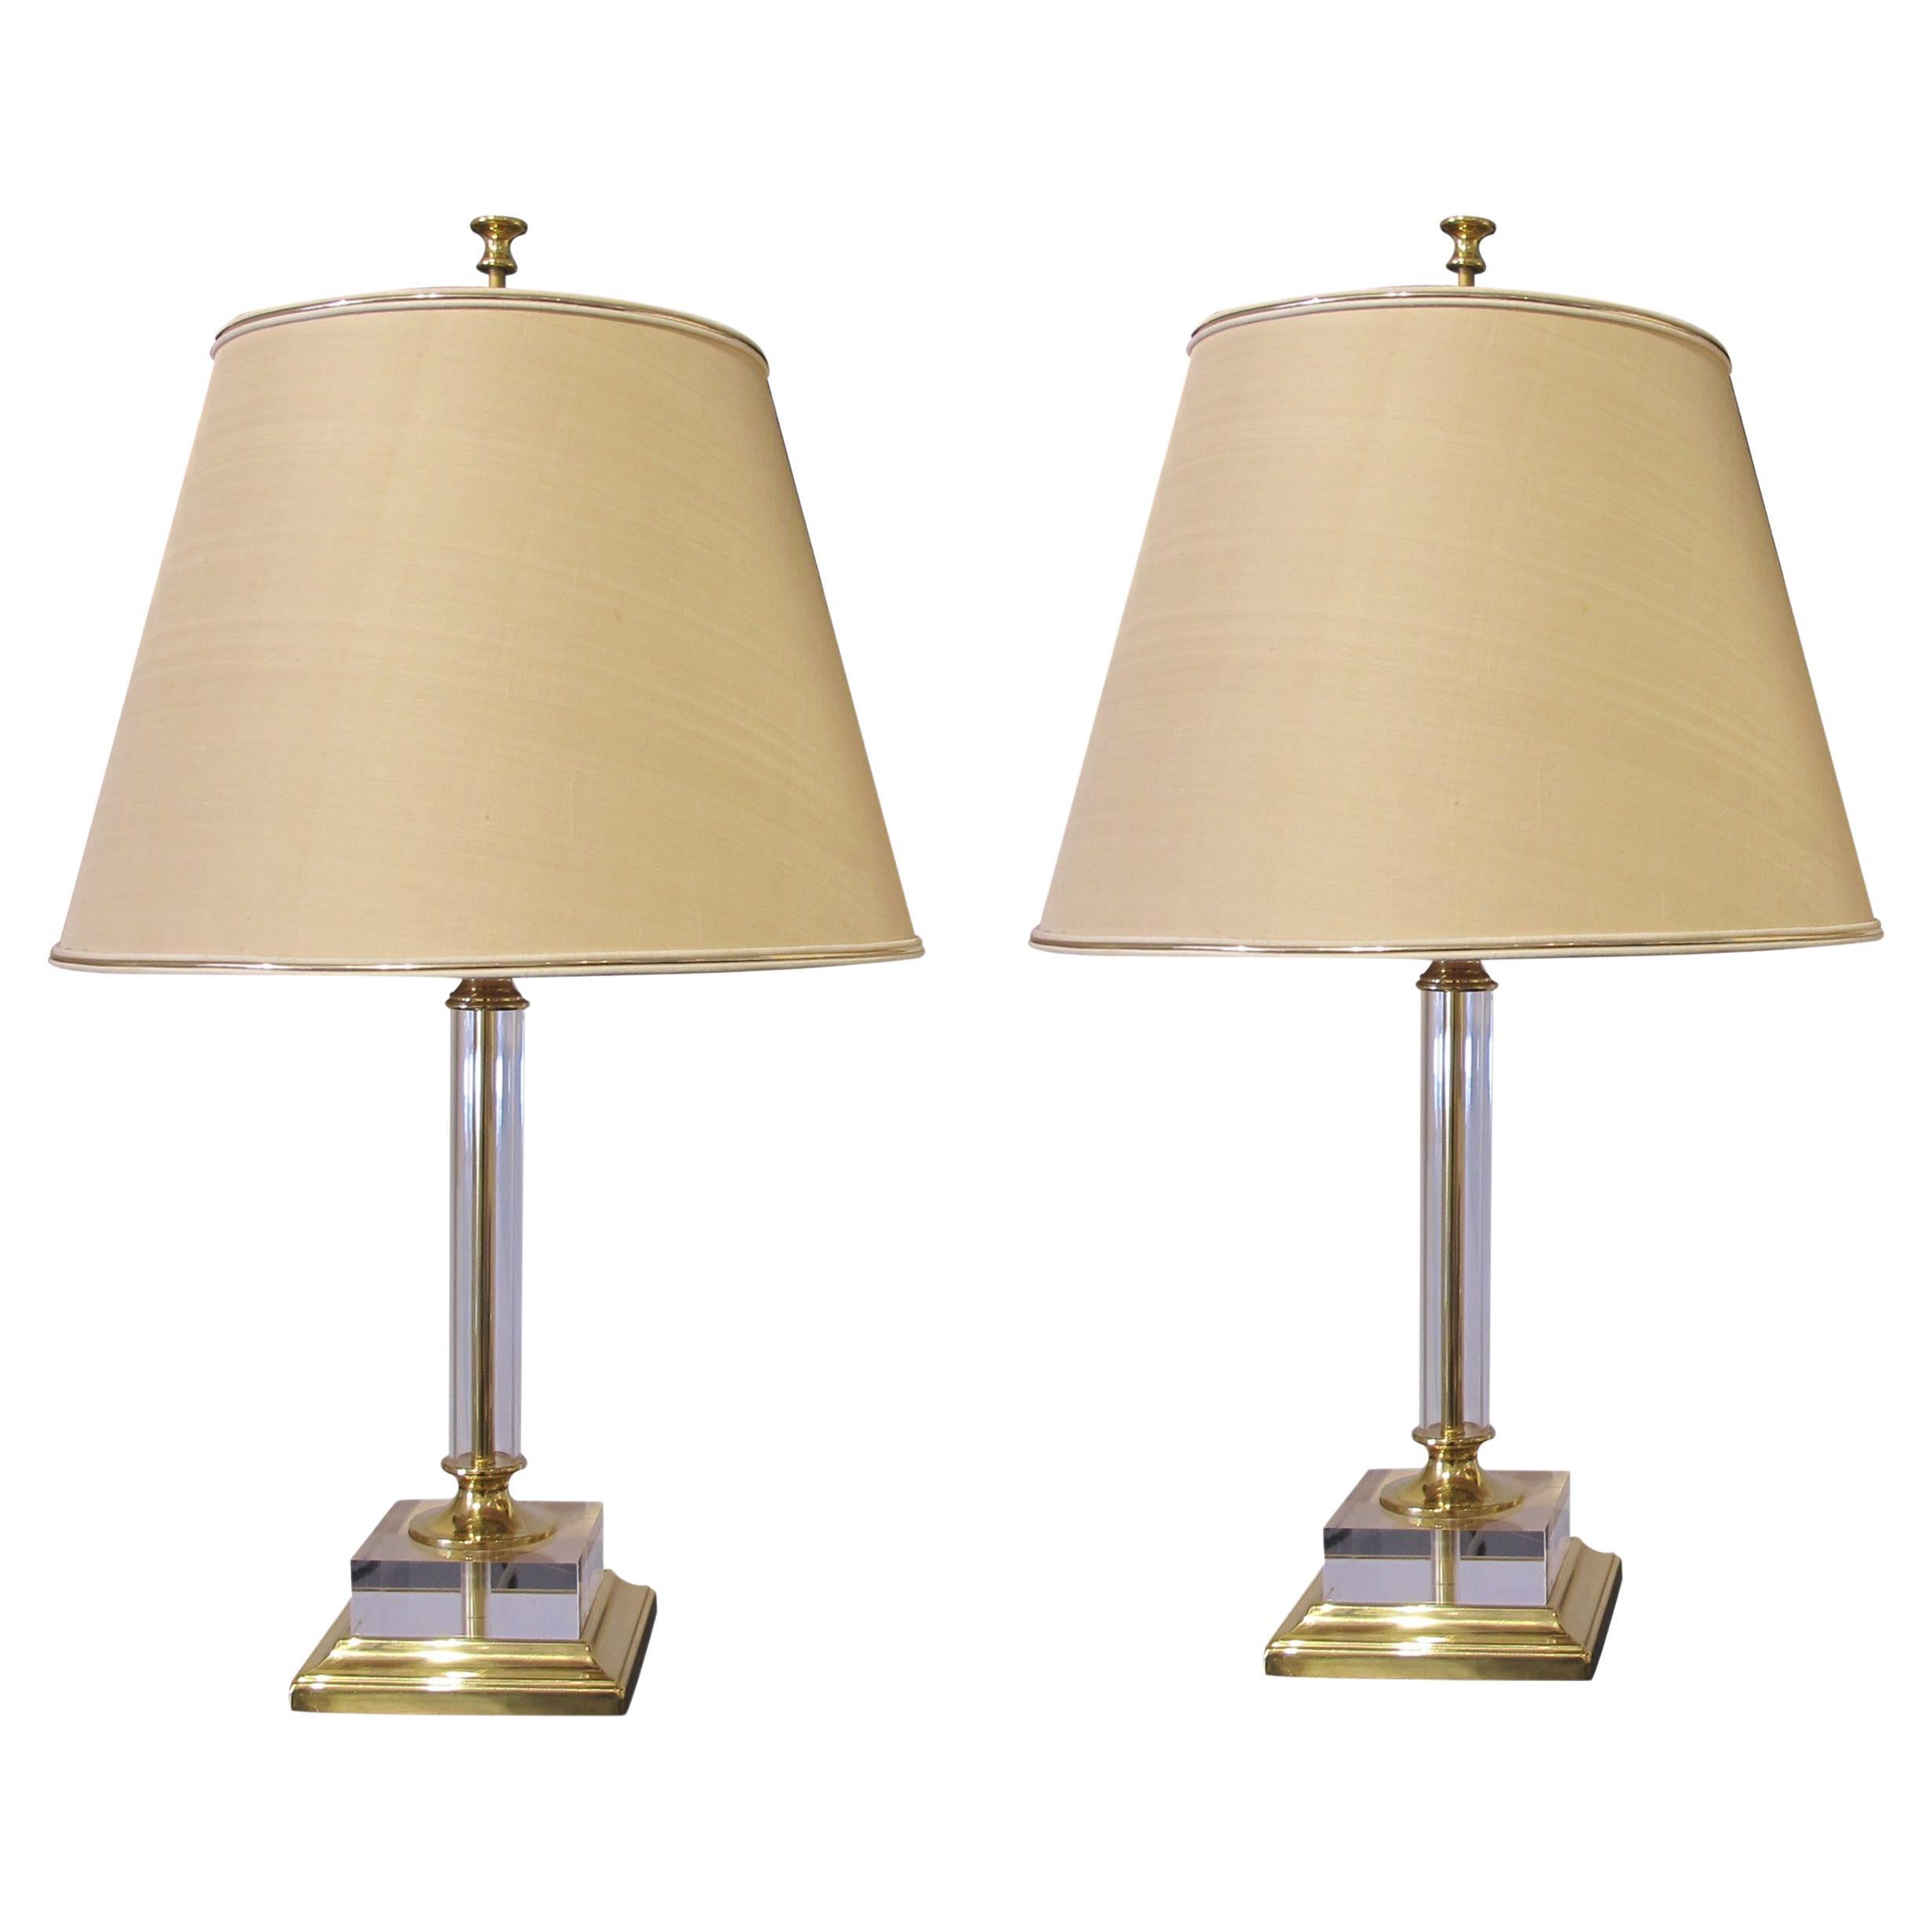 1970s Italian Pair of Large Lucite Table Lamps with Conic Lampshades For Sale